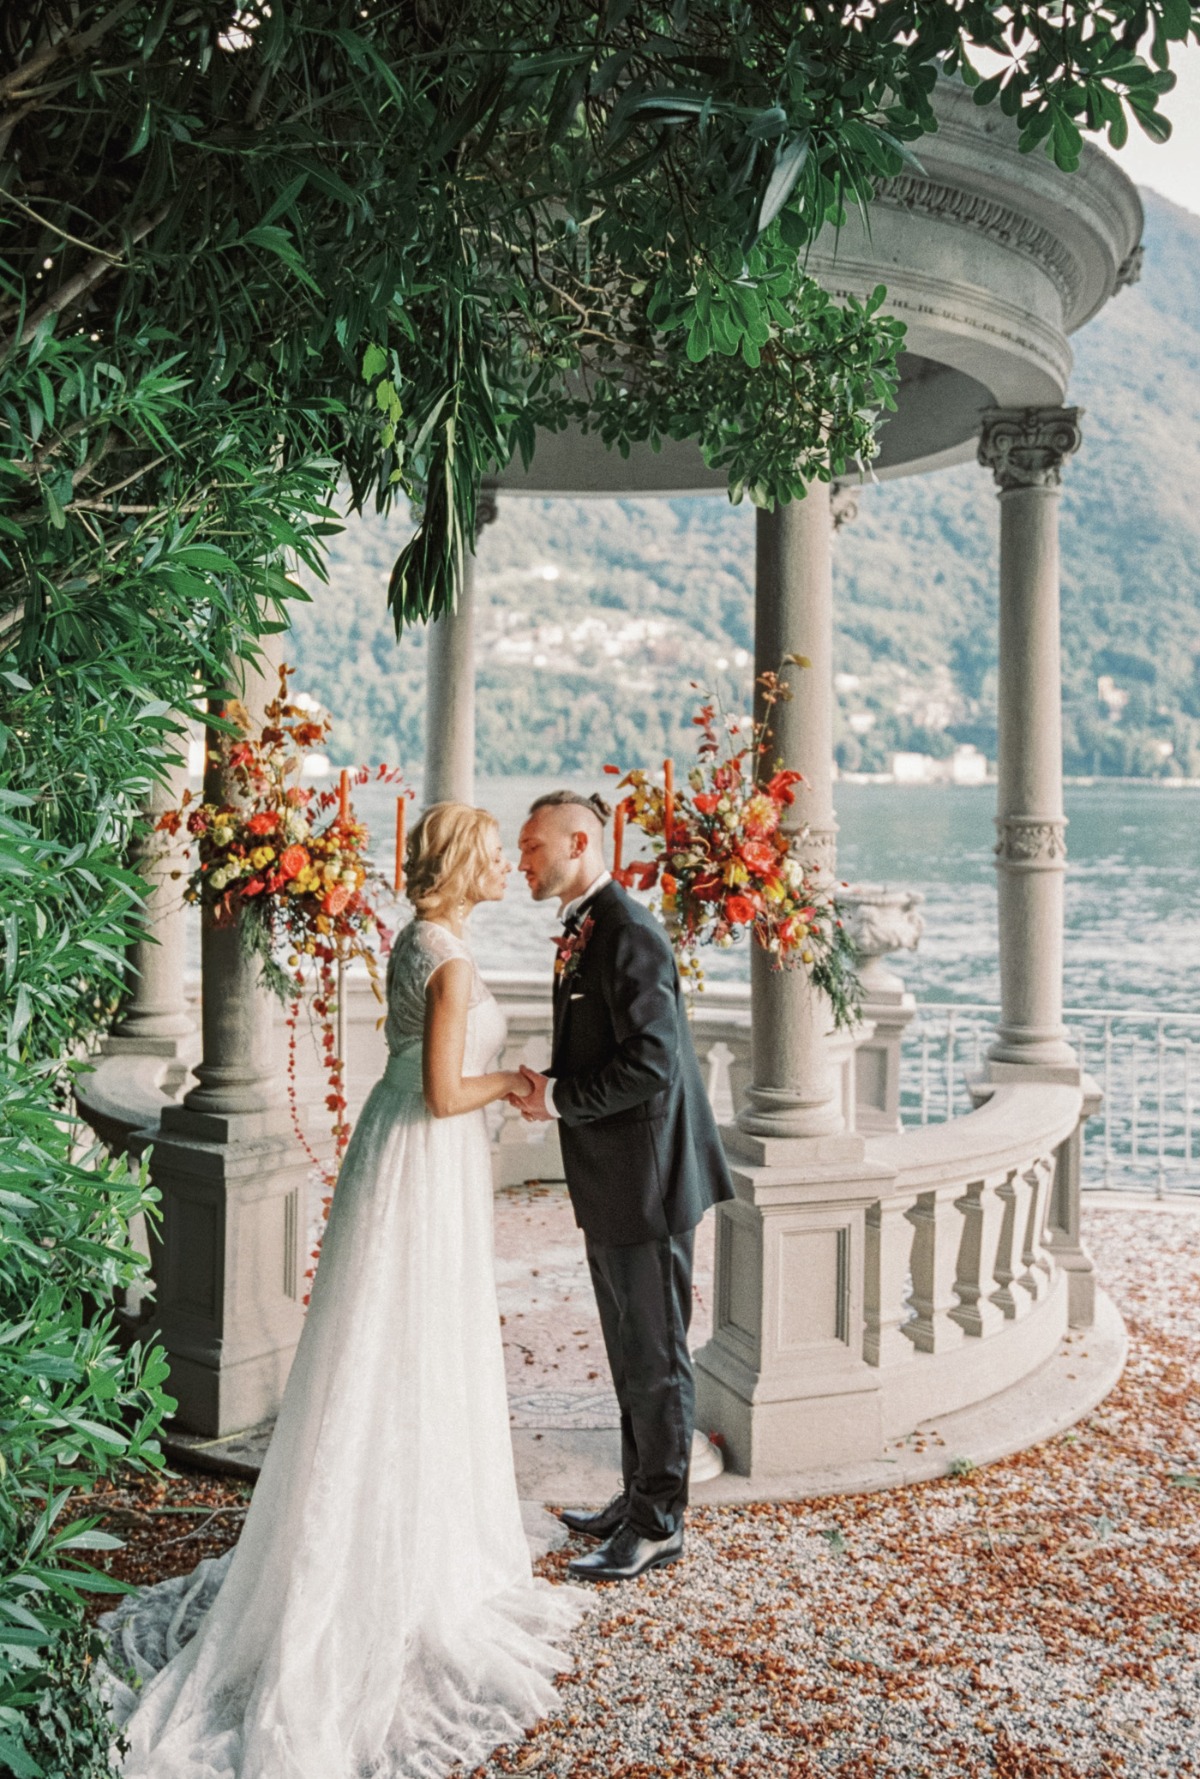 The Bride Wore Red Velvet Shoes for Her Fall Wedding Day on Lake Como